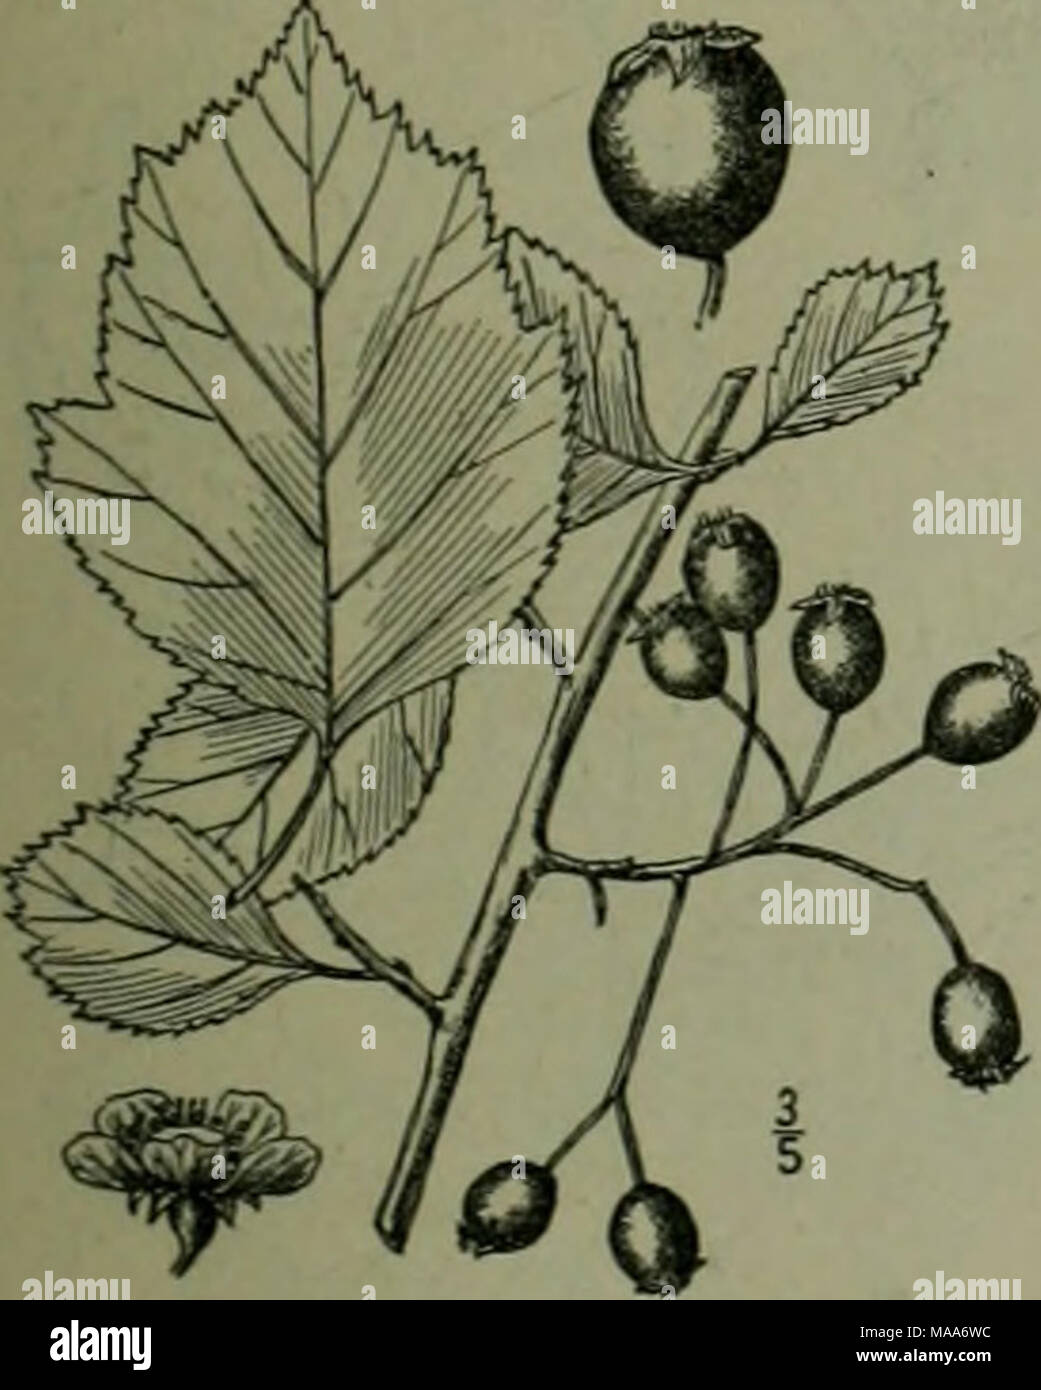 . An illustrated flora of the northern United States, Canada and the British possessions : from Newfoundland to the parallel of the southern boundary of Virginia and from the Atlantic Ocean westward to the 102nd meridian . 31. Crataegus nitida (Engelm.) Sargent. Shin- ing Thorn. Fig . 2365. Crataegus viridis nitida Engelm.; Britton &amp; Brown, III. FI. 2:242. 1897. Crataegus nitida Sarg. Bot. Gaz. 31: 231. 1901. A tree, sometimes 30° high, with ascending and spreading branches forming a broad irregular crown. Spines occasional, 1-2' long; leaves oblong-ovate to oval, li'-3' long, i'-2l' wide, Stock Photo